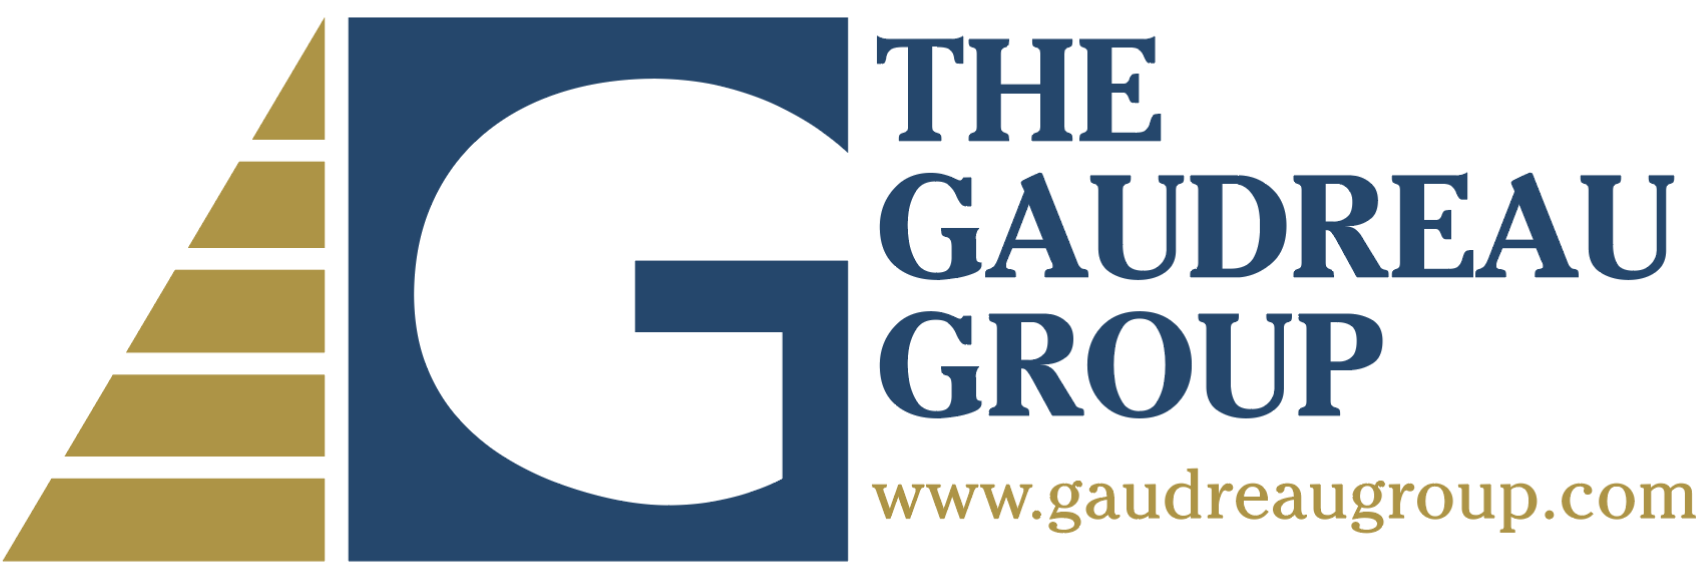 The Gaudreau Group logo. A blue letter G with an olive triangle to the left and the company name to the right